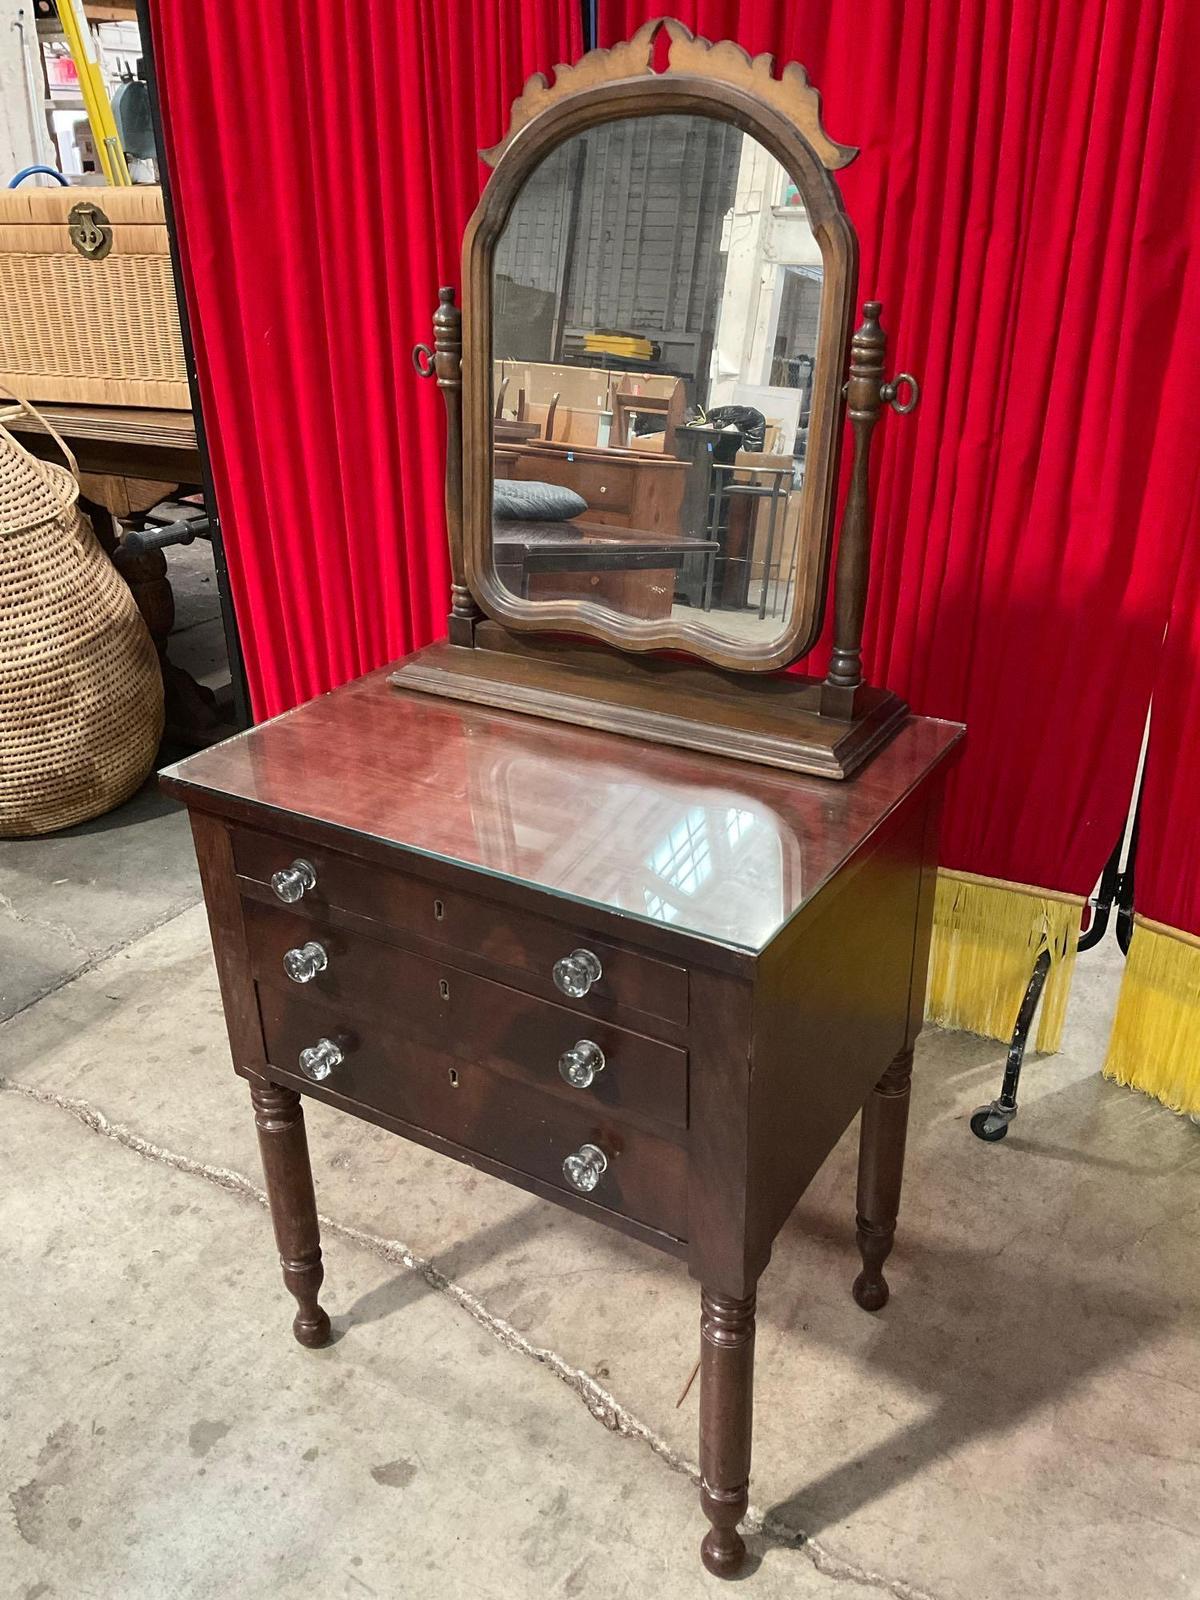 Antique Petite Wooden Vanity w/ Glass Top, 3 Drawers, Clear Knobs & Revolving Mirror. See pics.